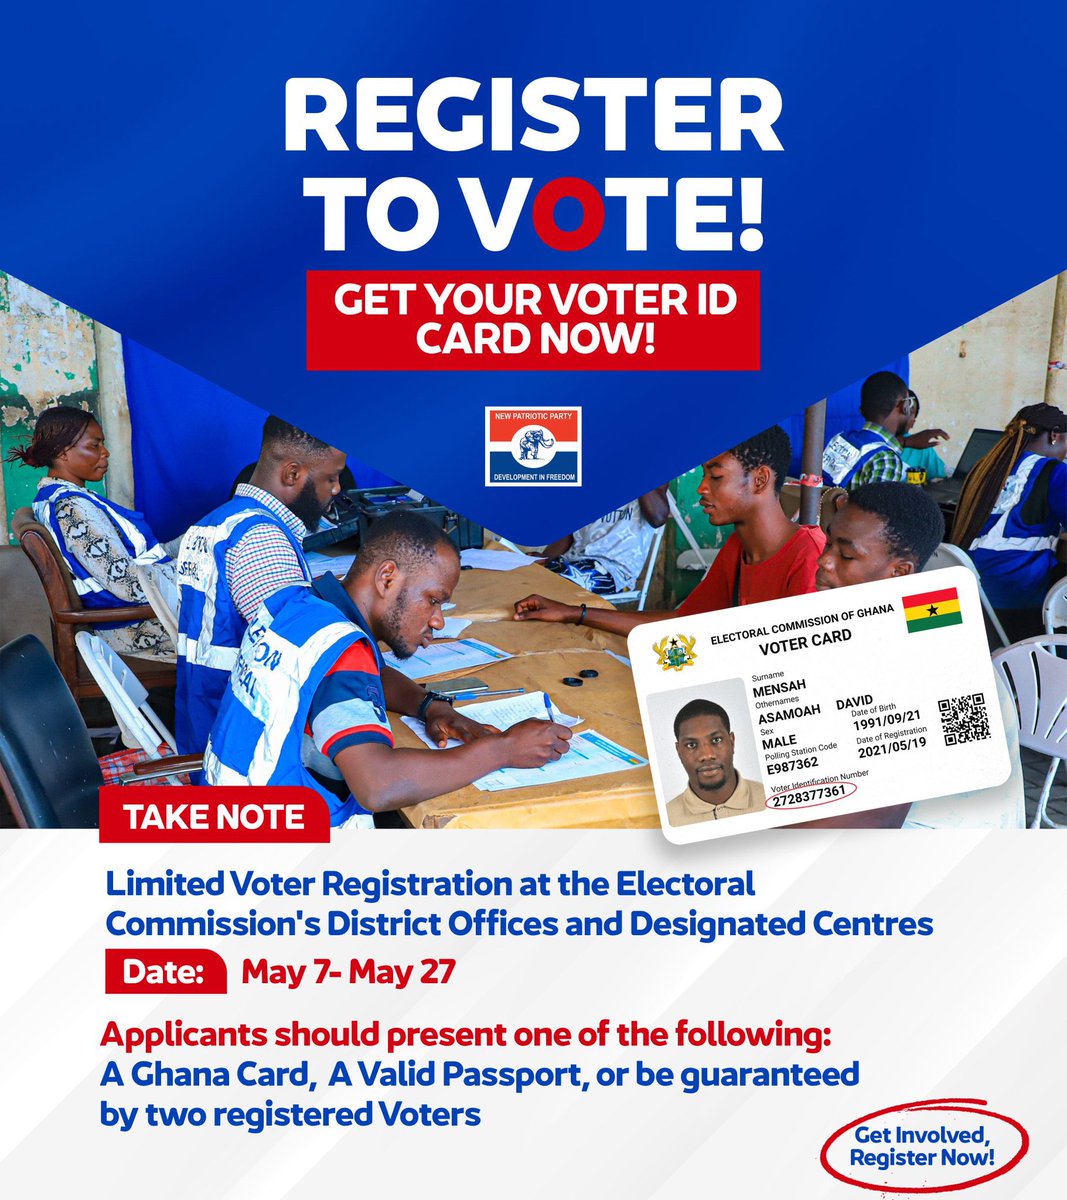 Voting is your civic duty as a citizen, get involved and register now and help better Ghana with bold solutions for our future. It is possible! #Bawumia2024